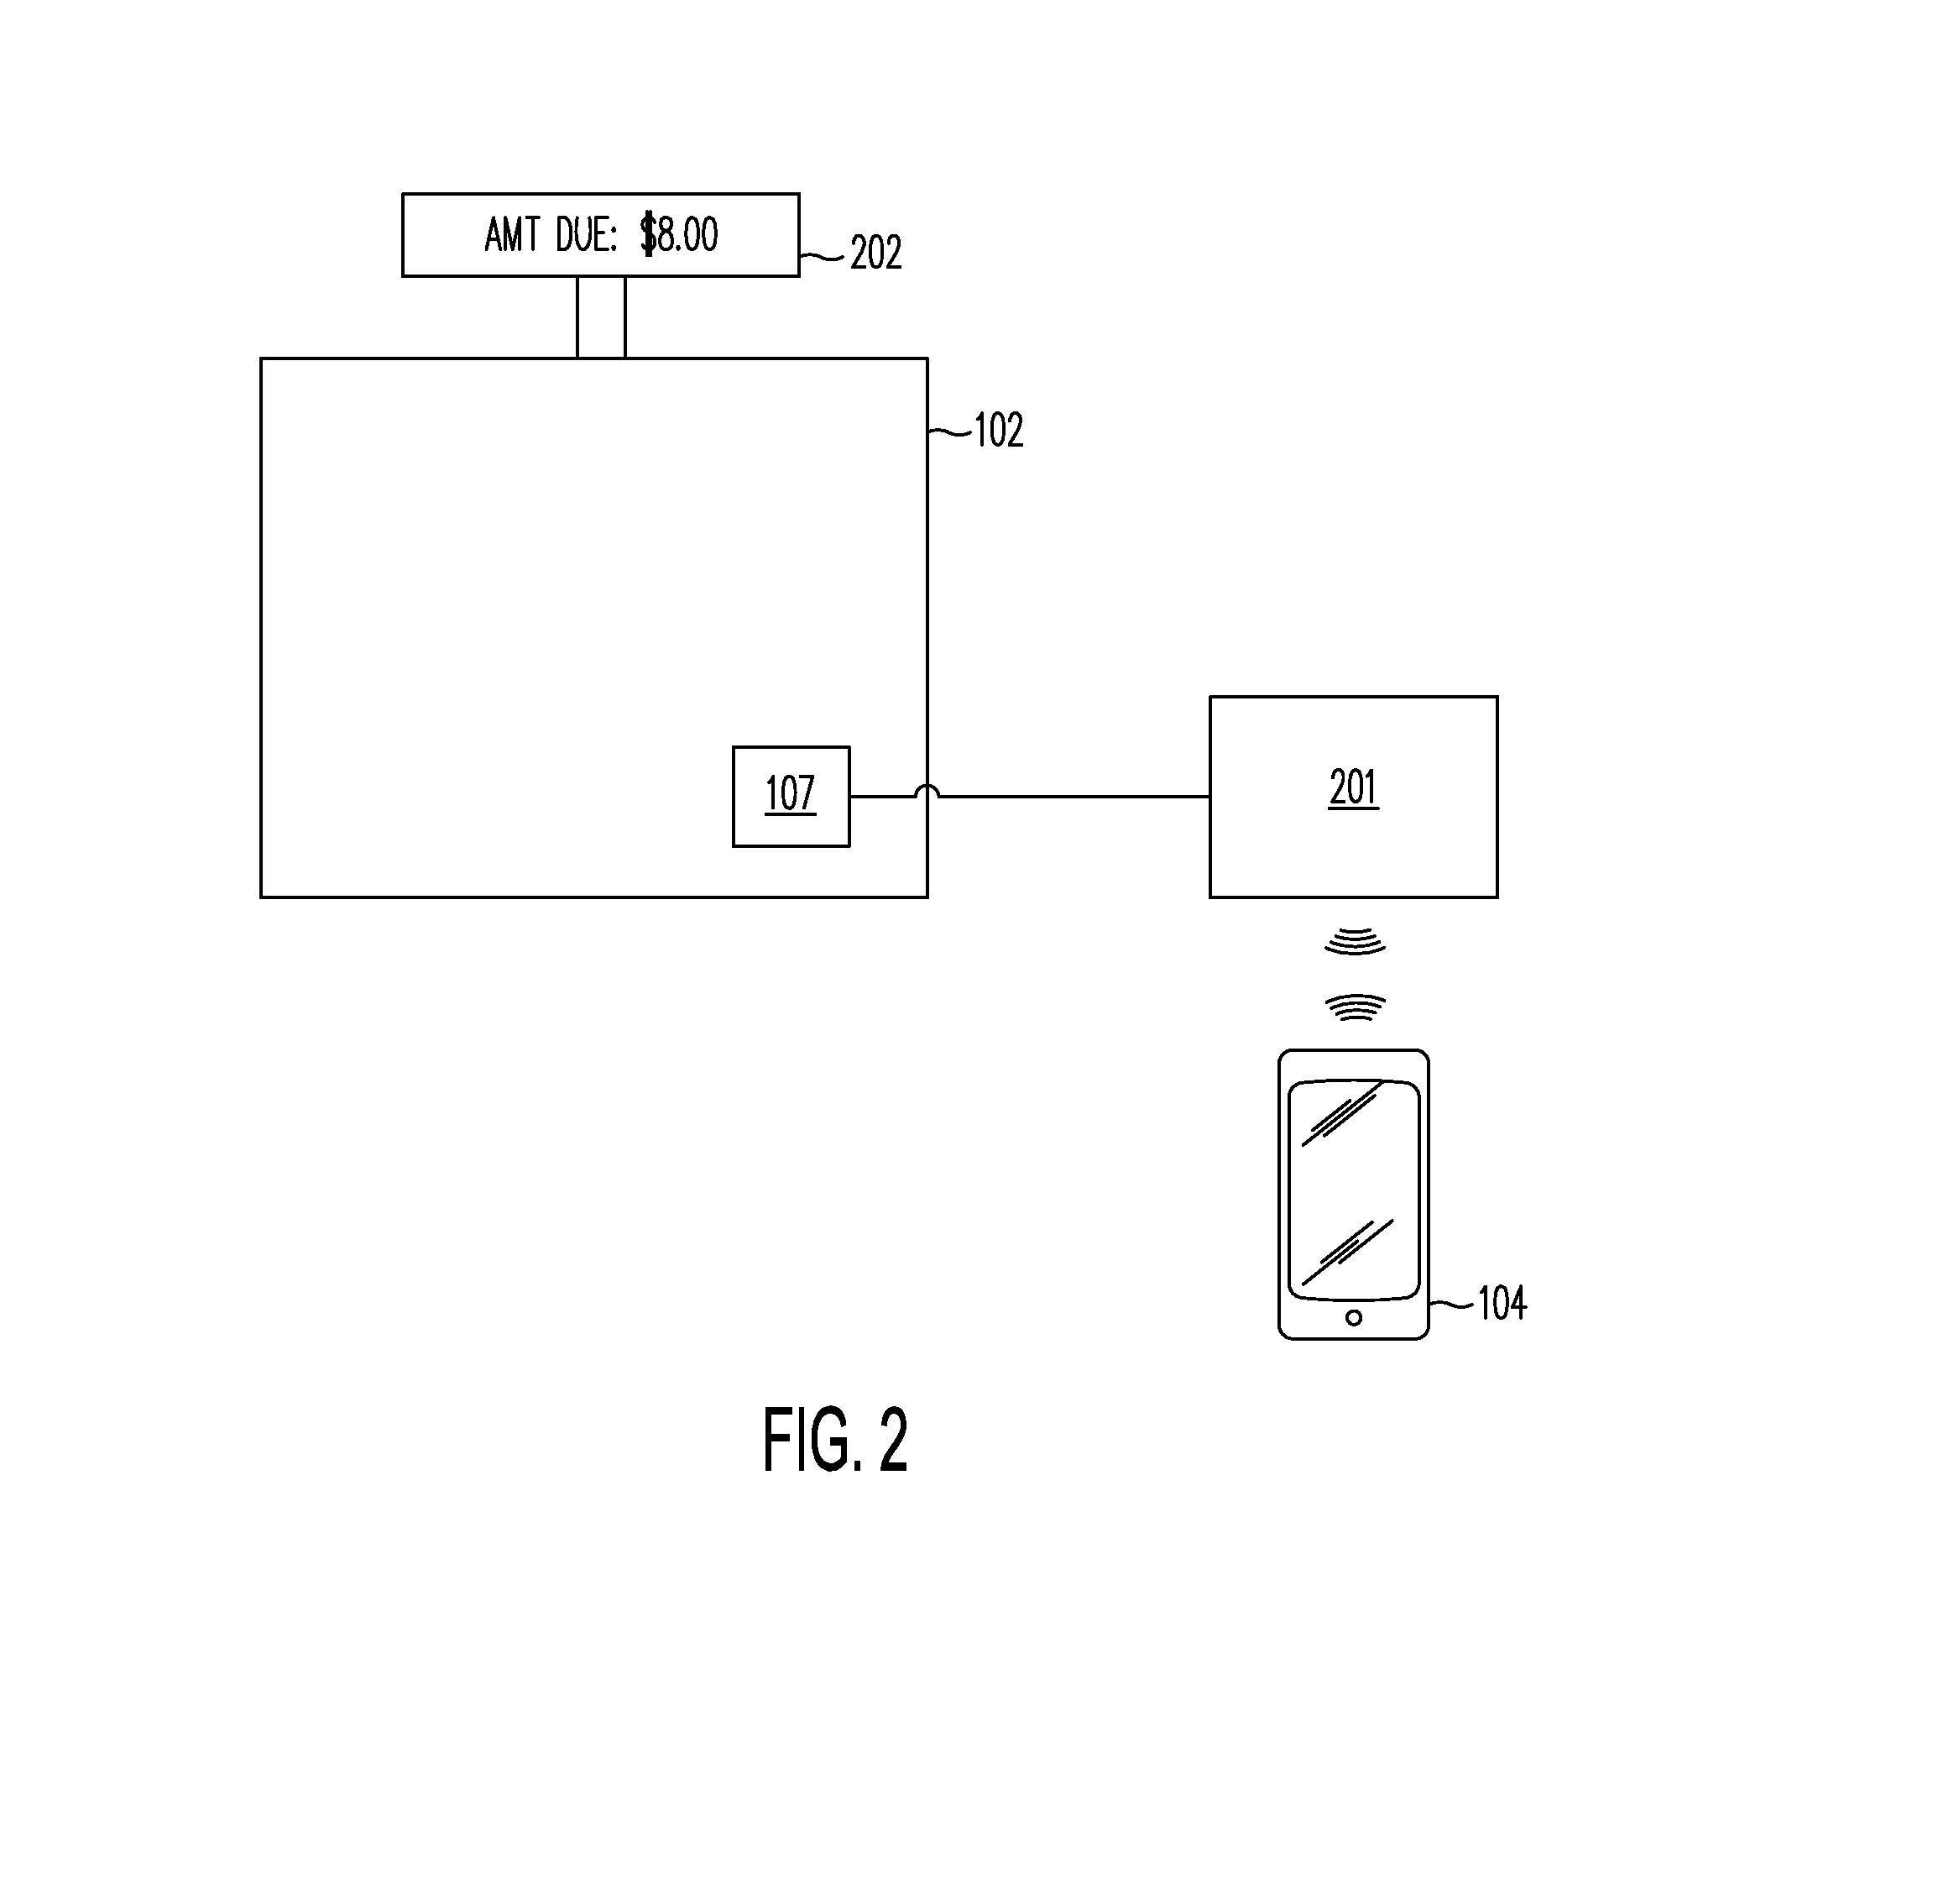 Systems, methods, and computer program products providing electronic communication during transactions